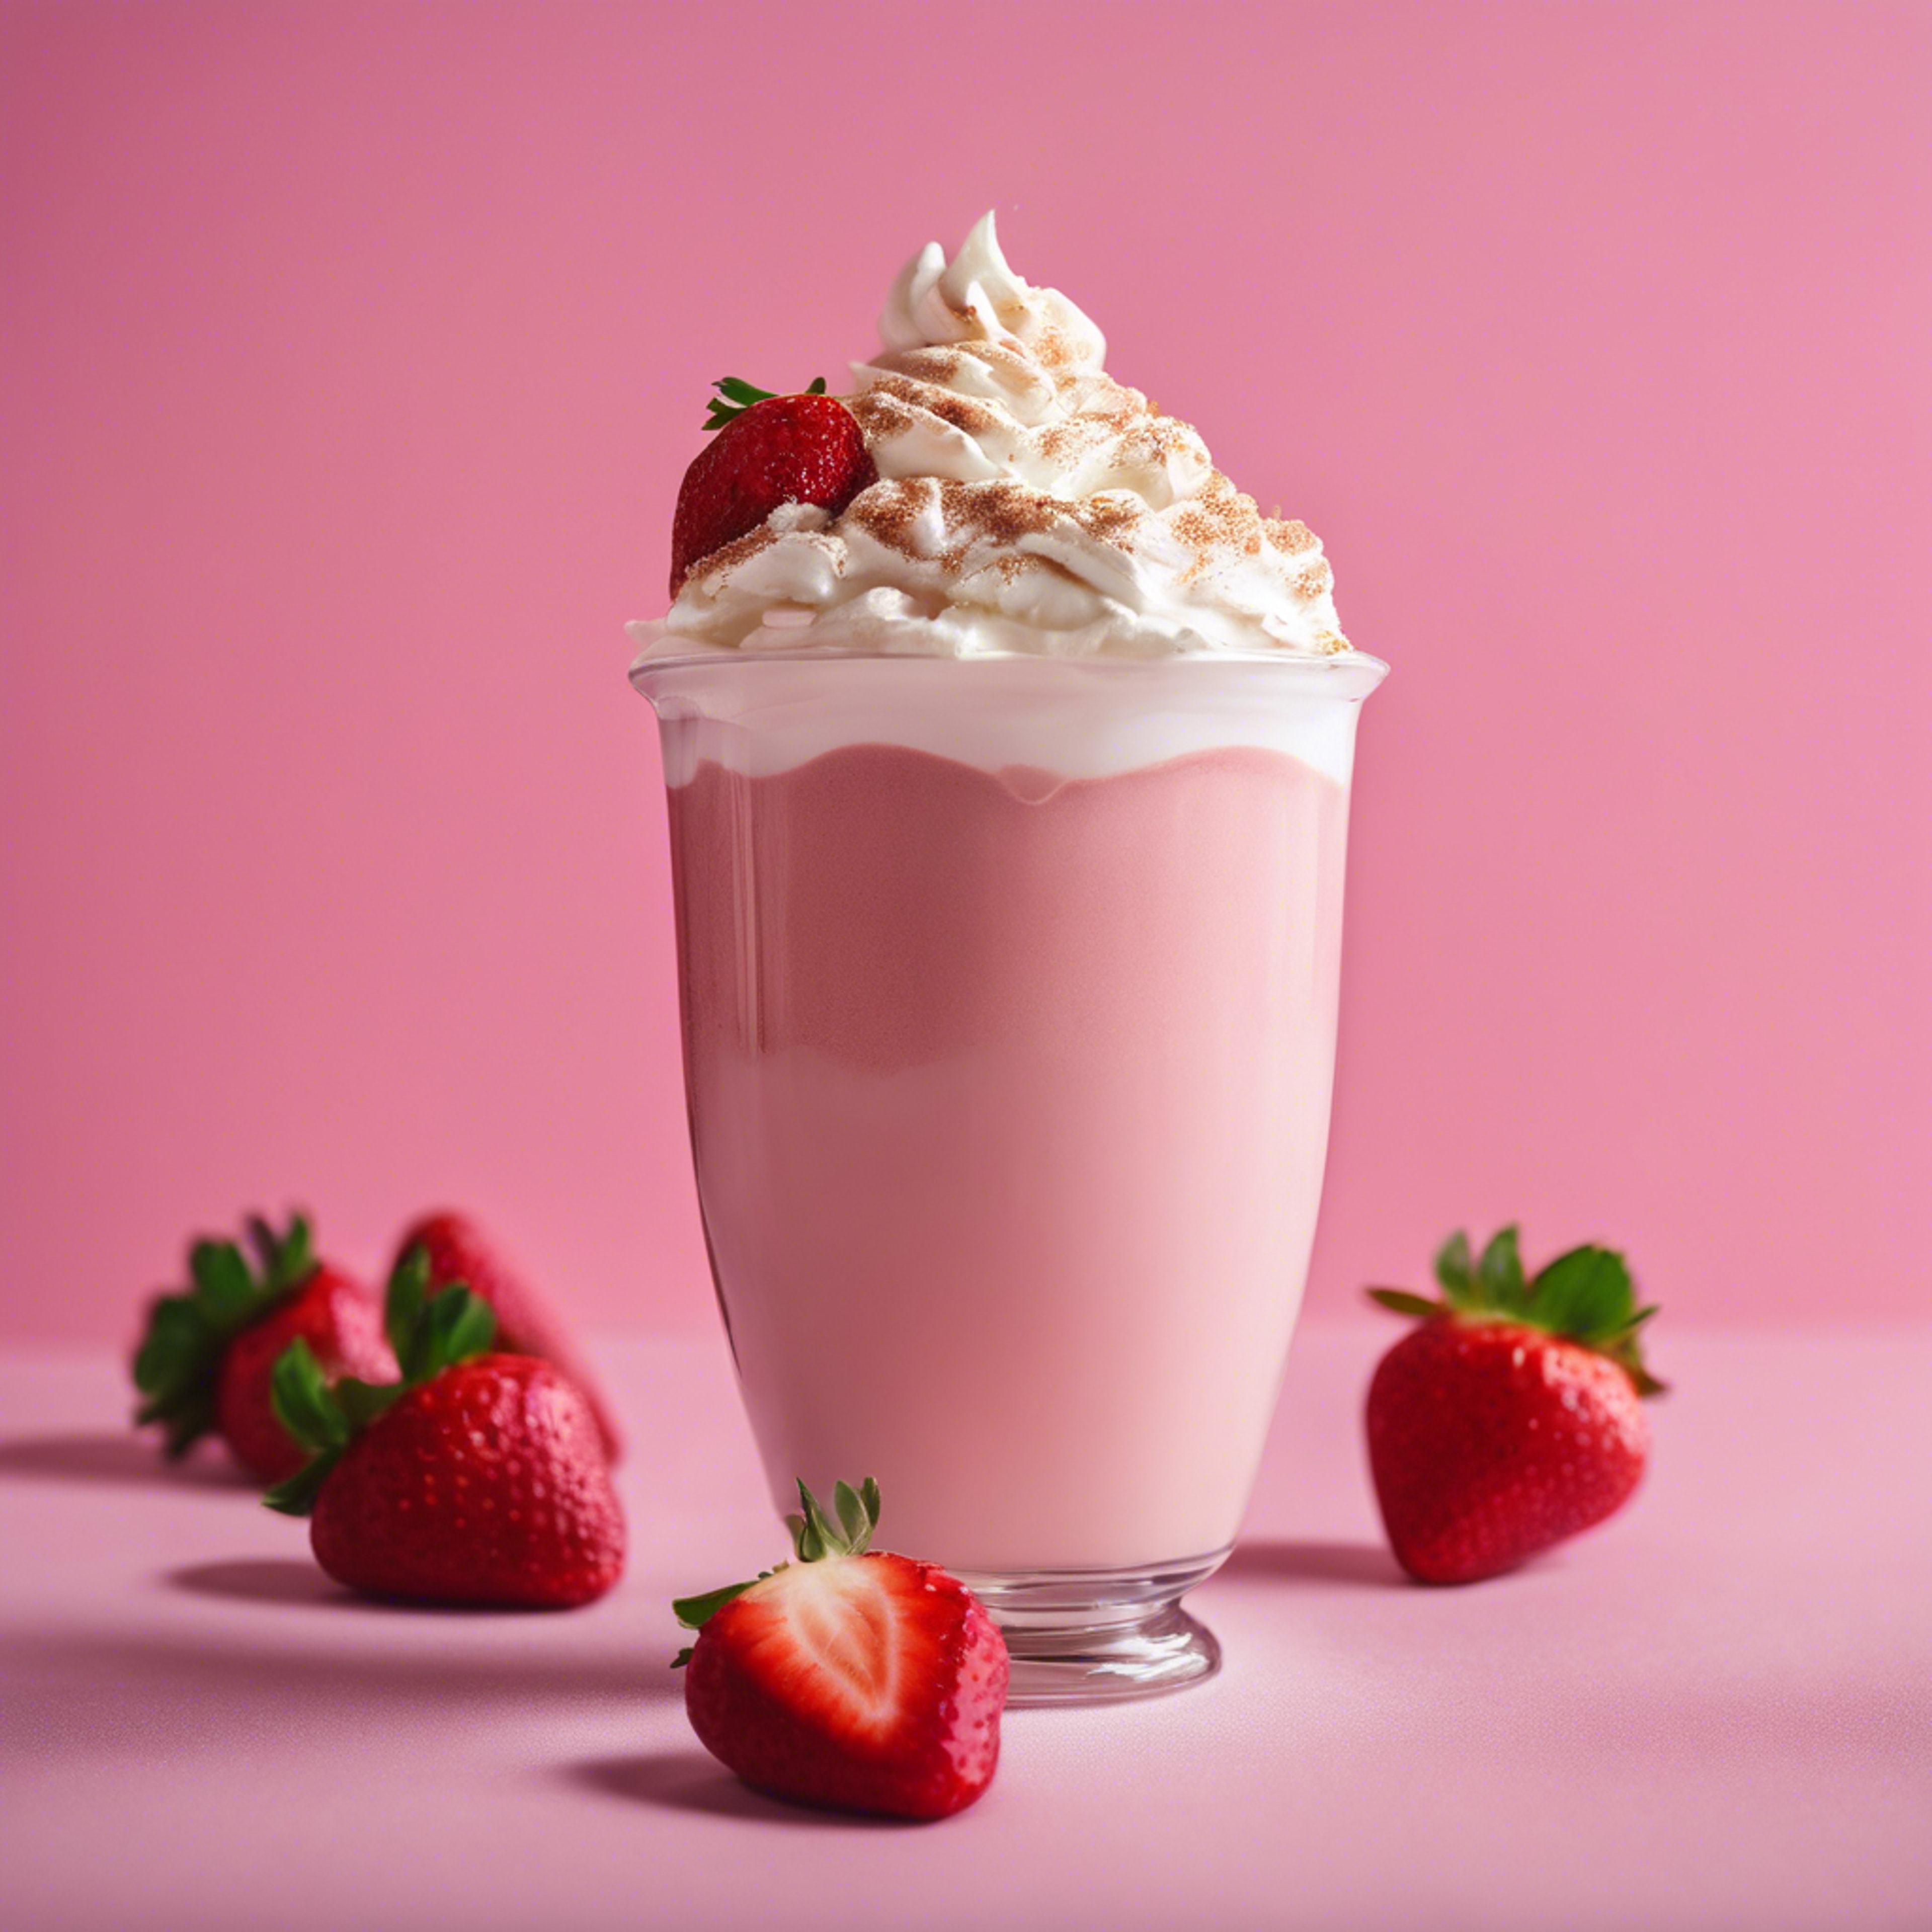 A freshly brewed strawberry latte with whipped cream against a pink backdrop.壁紙[f1420ed34c924526b0ea]